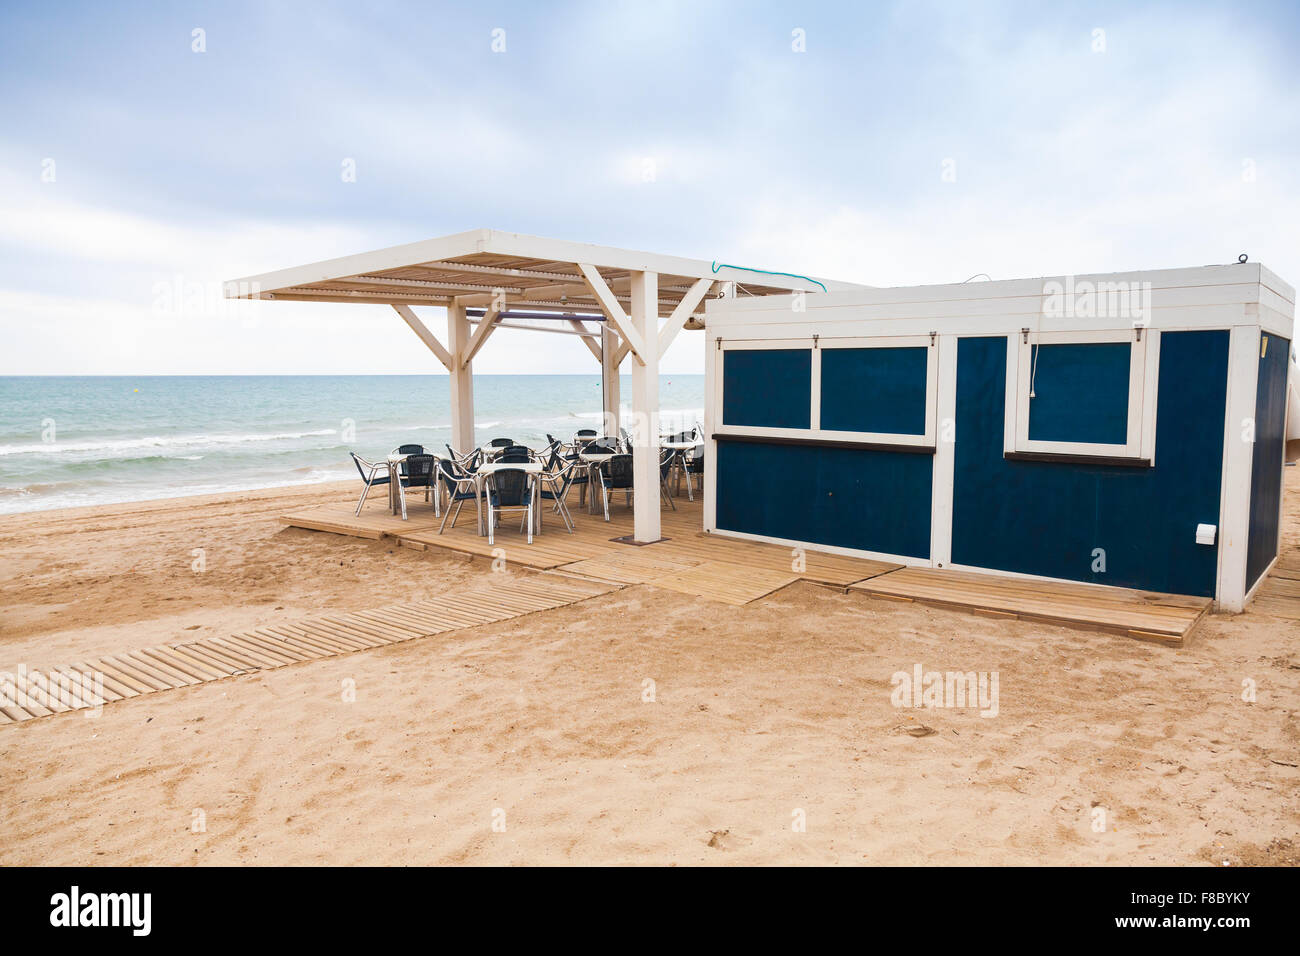 Empty open space bar with wooden floor and metal armchairs on the sandy beach, Mediterranean Sea coast, Spain Stock Photo